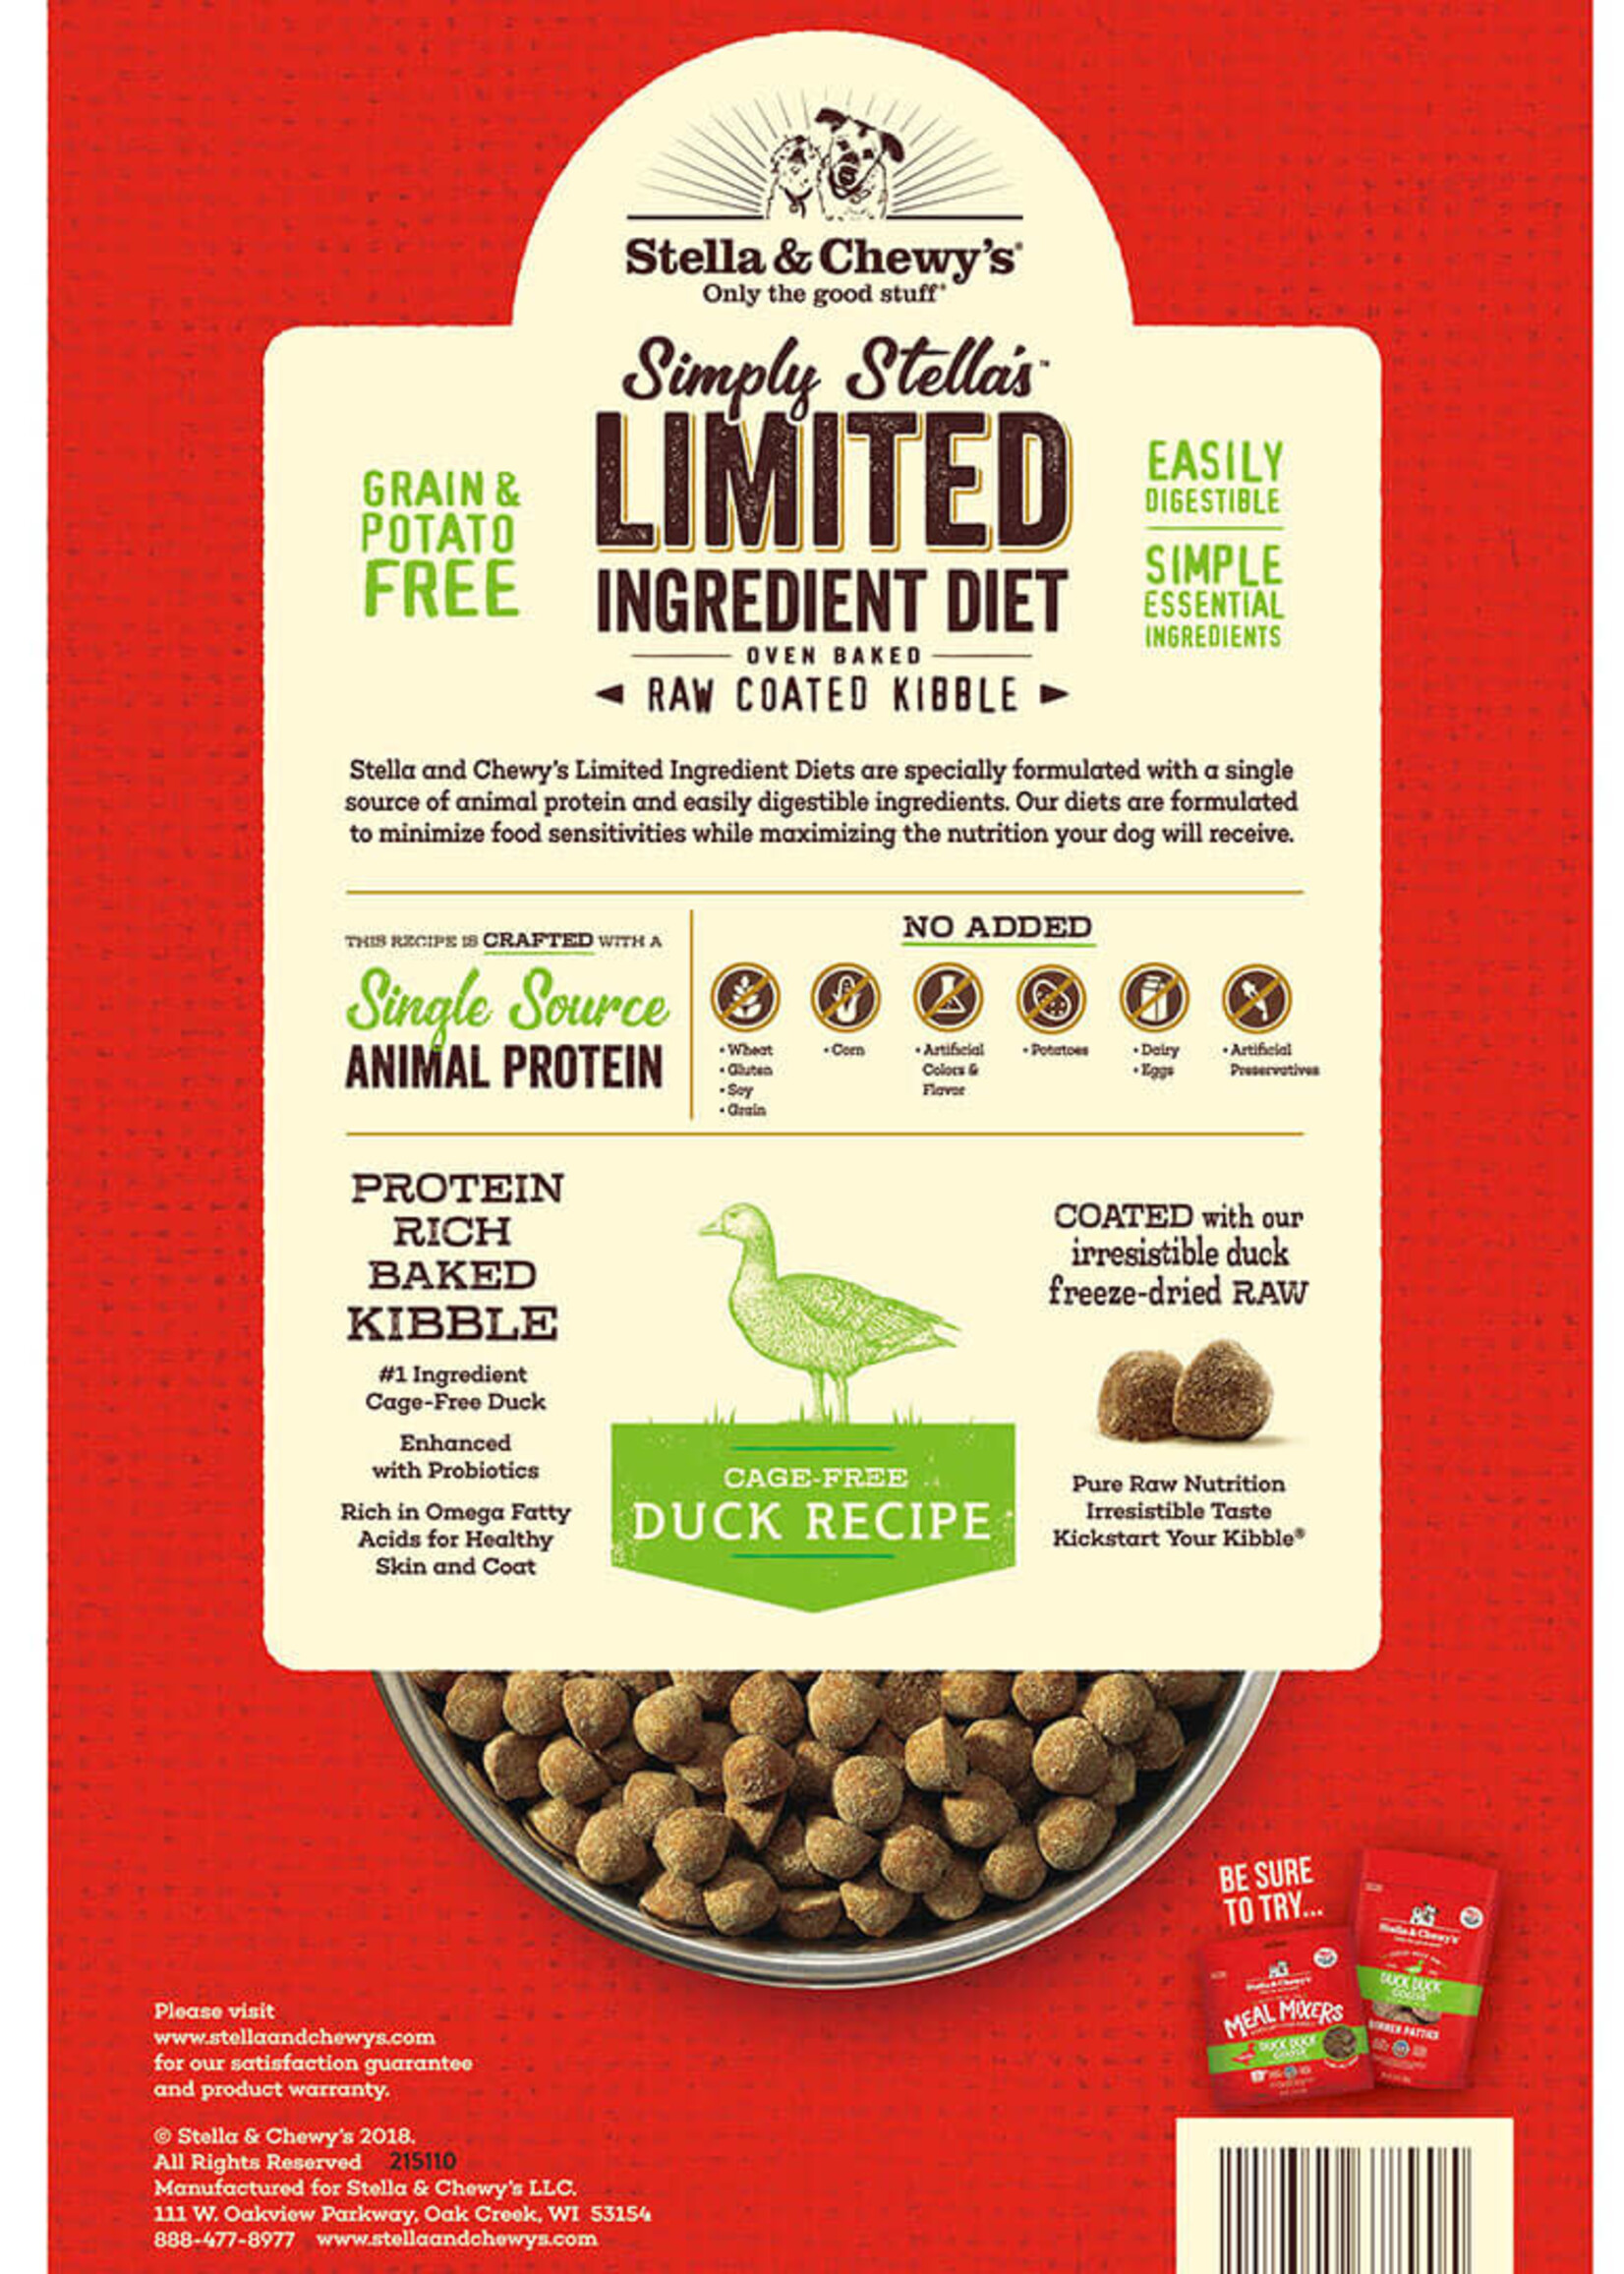 Stella & Chewy's Stella & Chewy's Raw Coated Kibble Limited Ingredient Cage-Free Duck Recipe Dry Dog Food